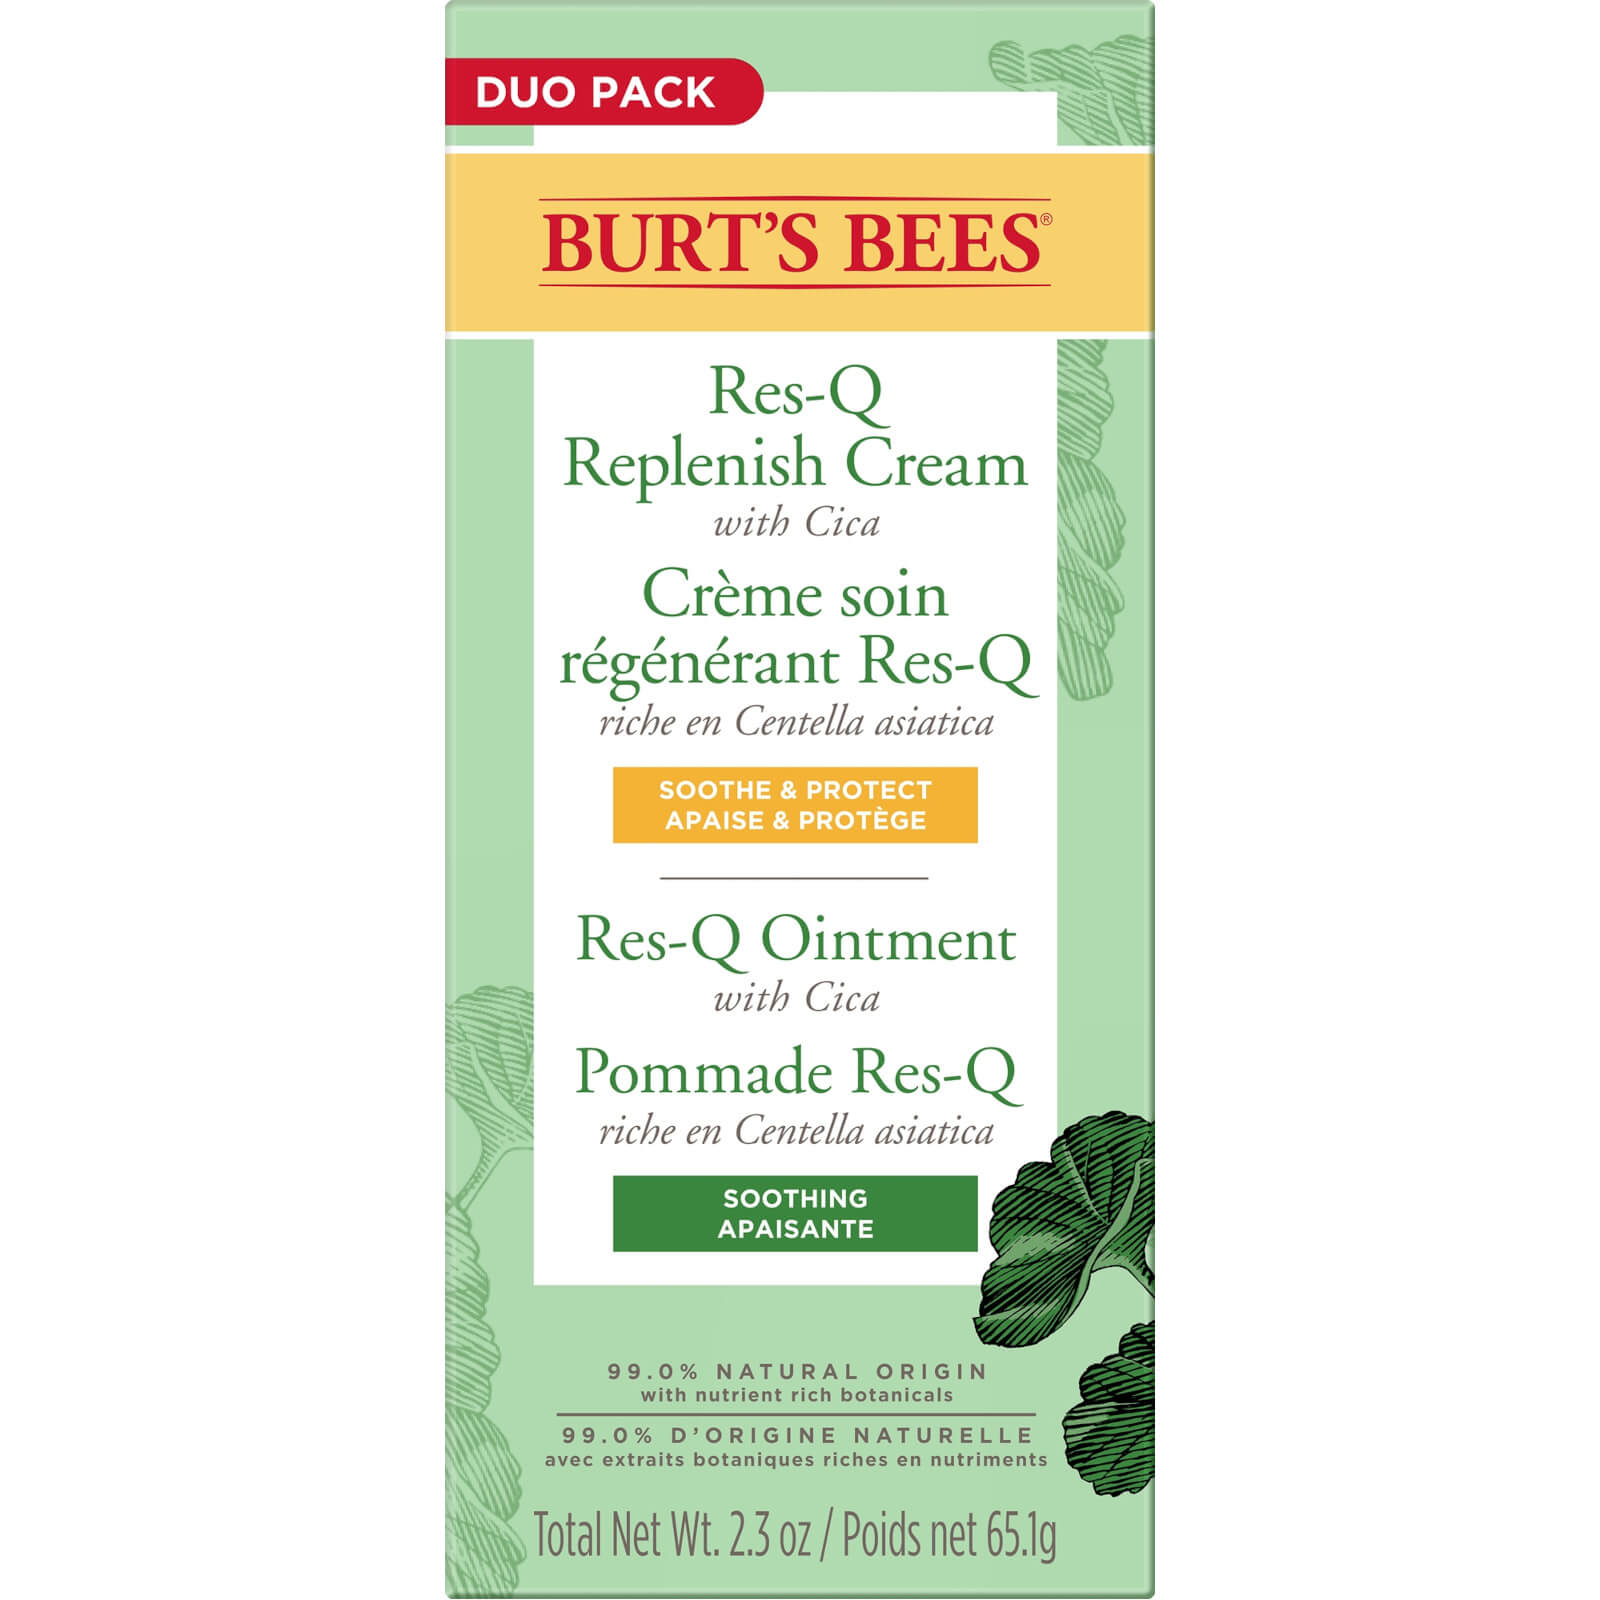 Burts Bees Res-Q Replenish Cream + Ointment Duo Pack 65.1g